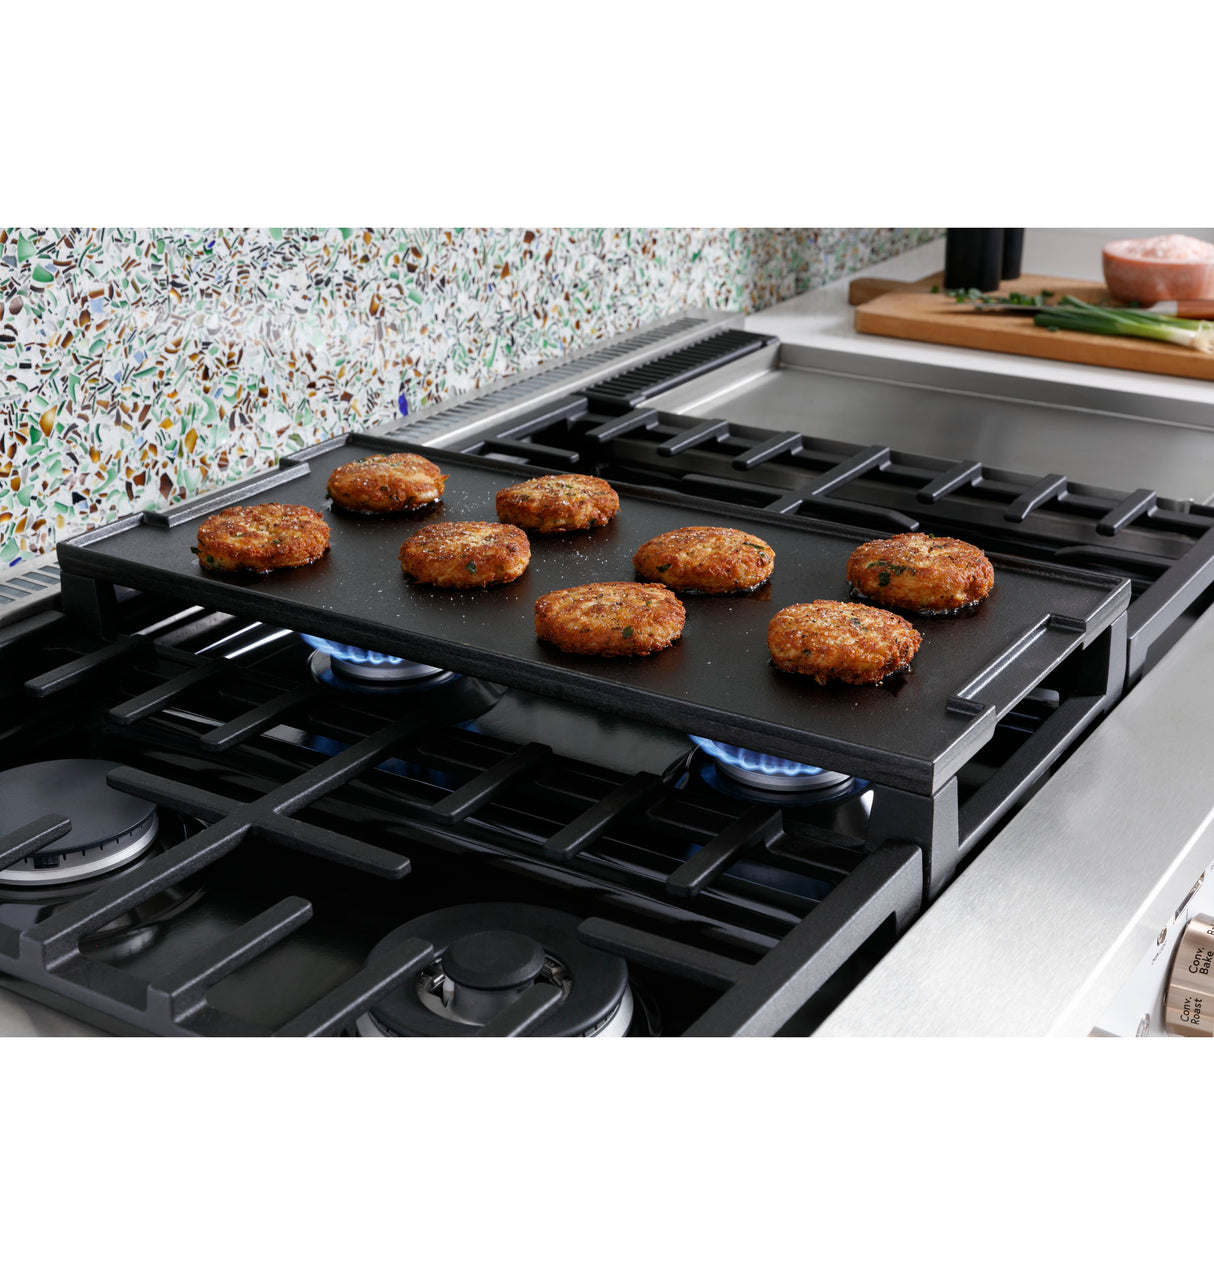 Caf(eback)(TM) 48" Smart Dual-Fuel Commercial-Style Range with 6 Burners and Griddle (Natural Gas) - (C2Y486P4TW2)